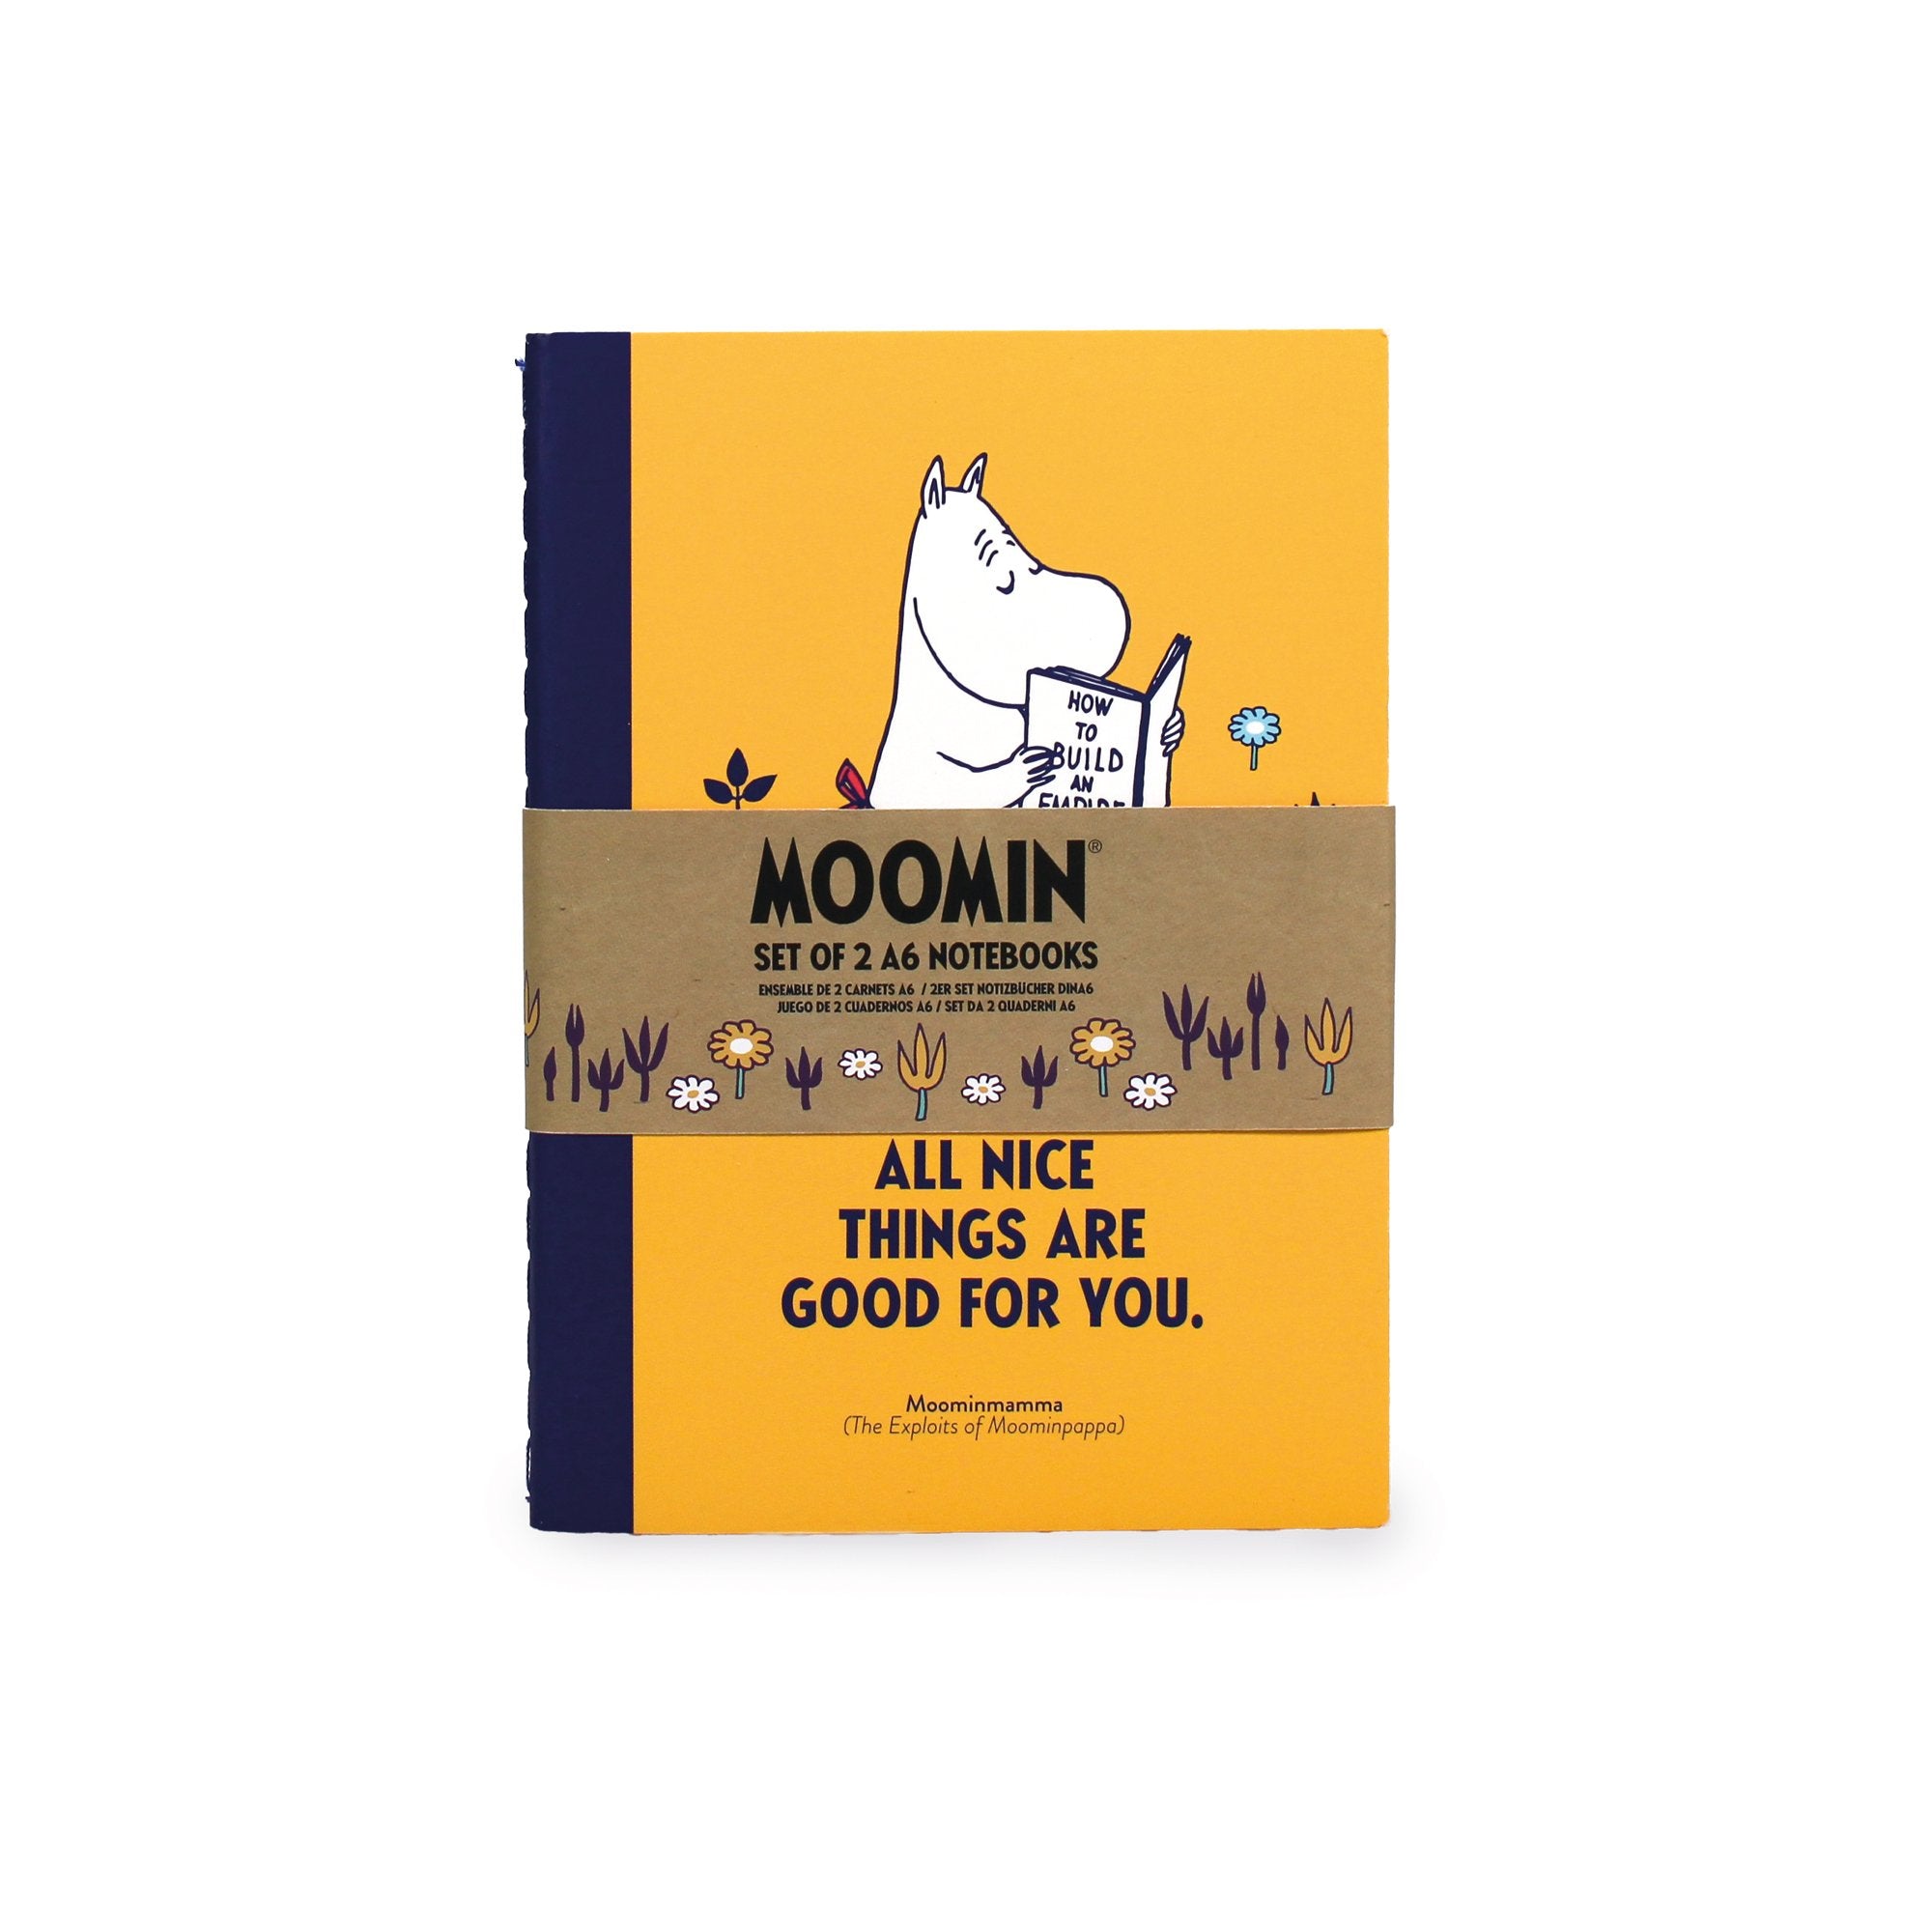 A6 Notebooks Set of 2 - Moomin